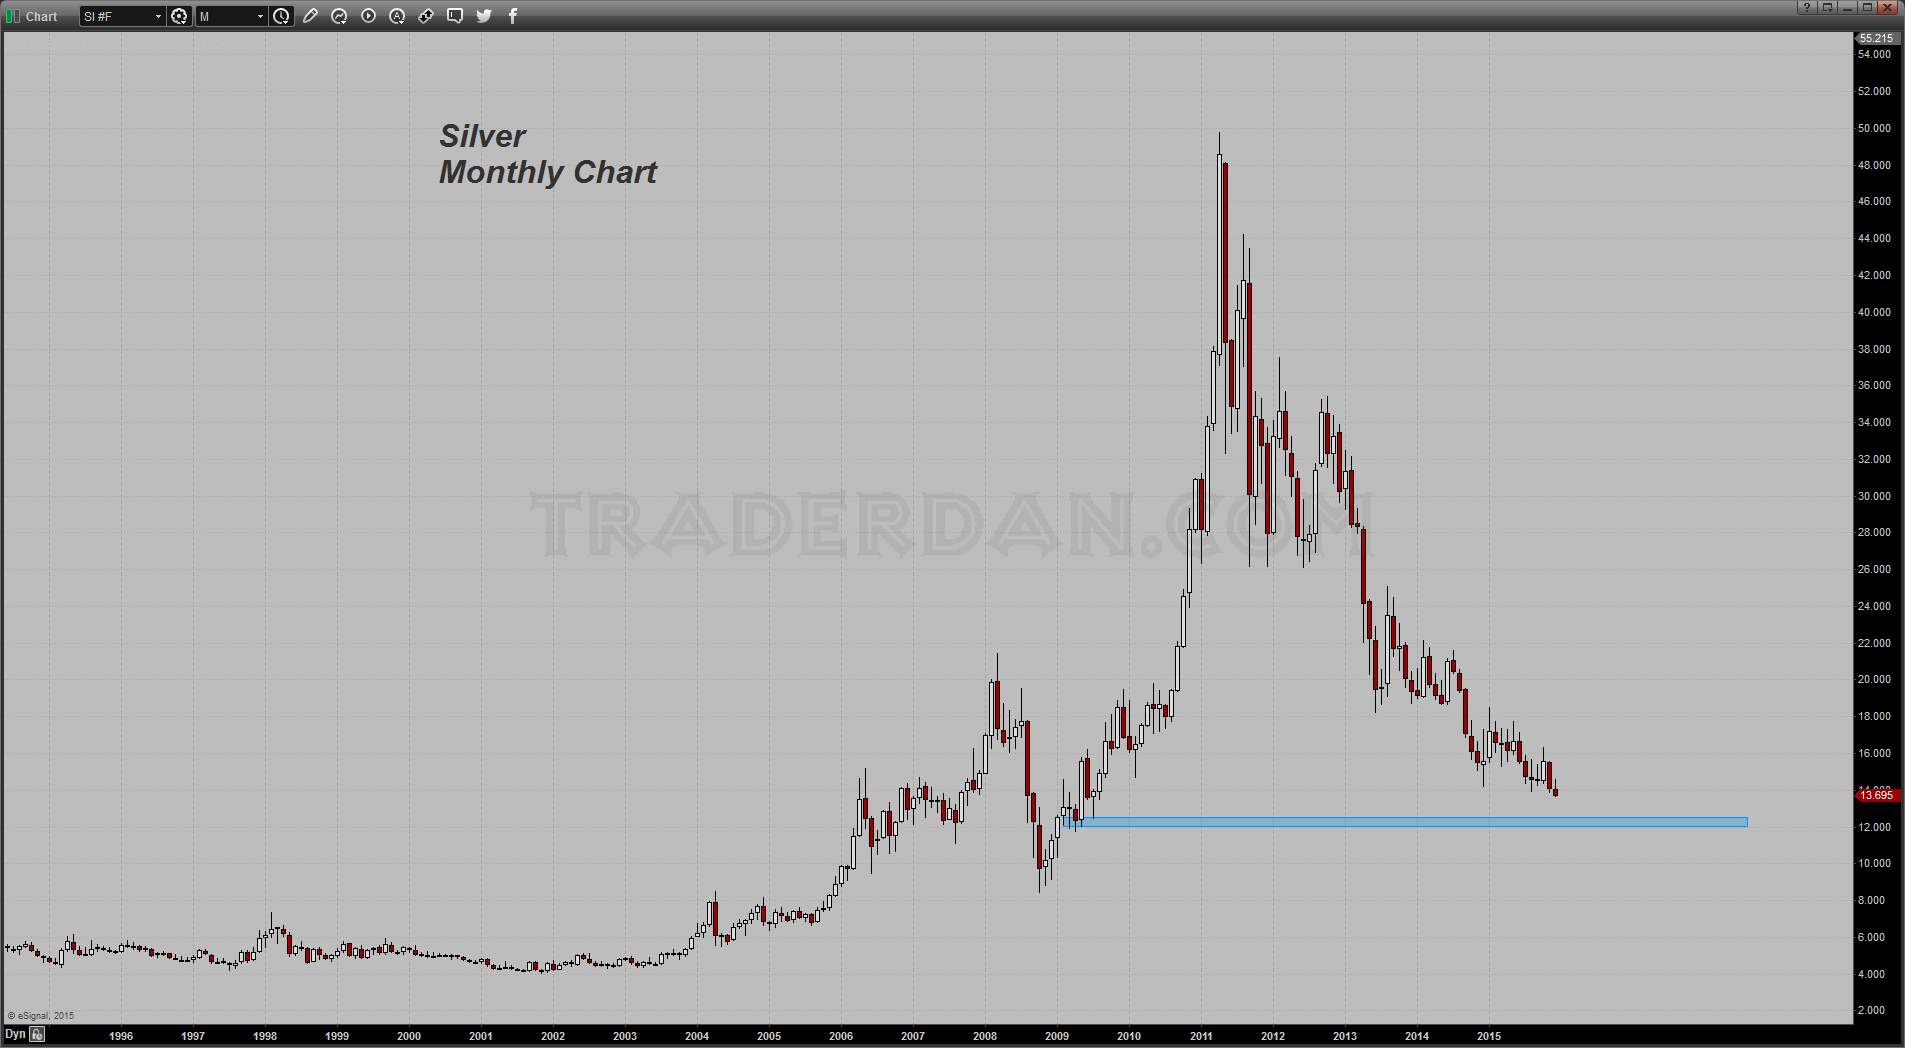 Silver Monthly 1995-2015